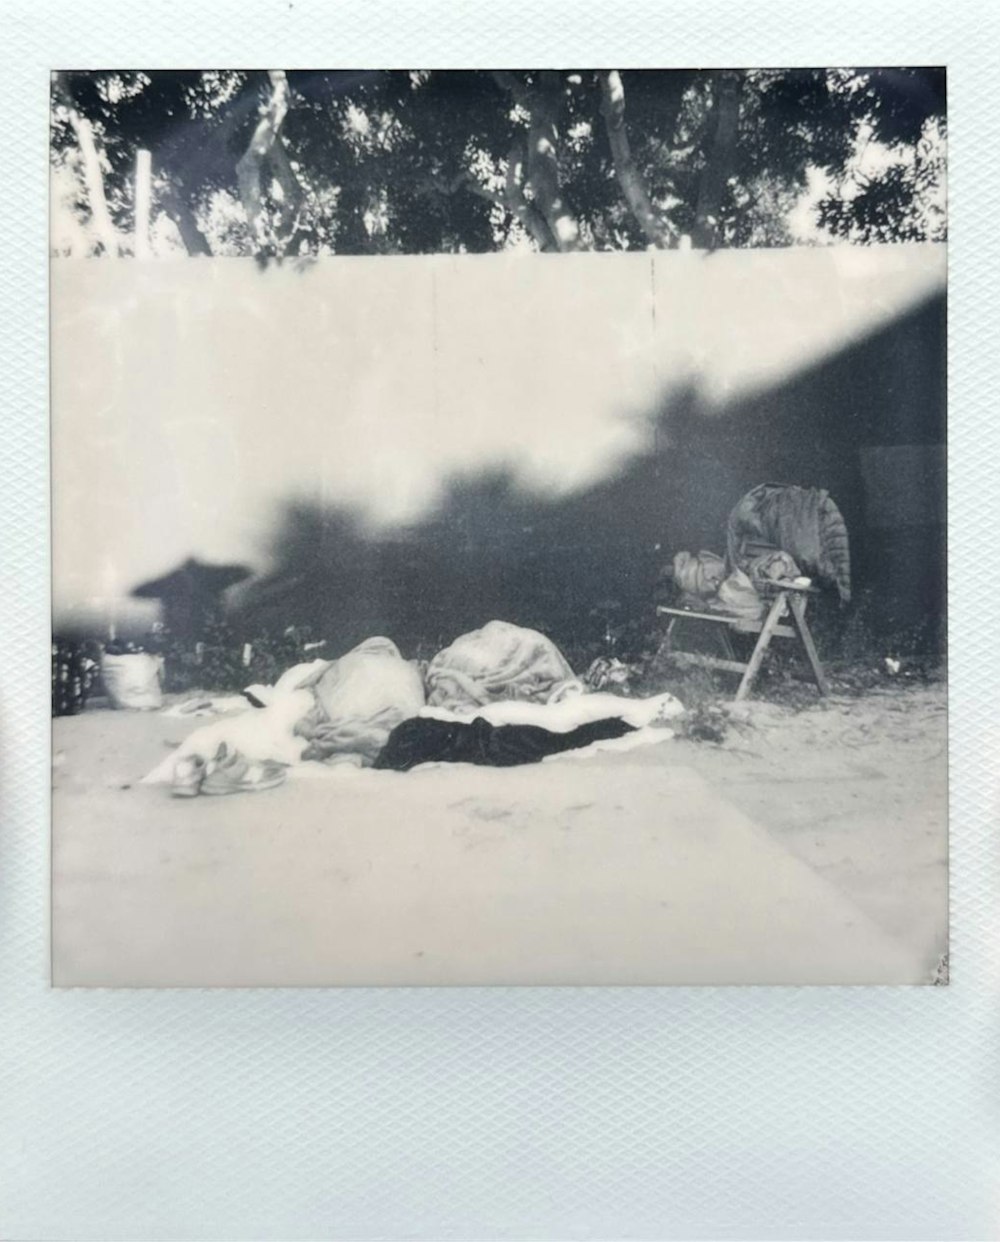 a black and white photo of a person laying on the ground